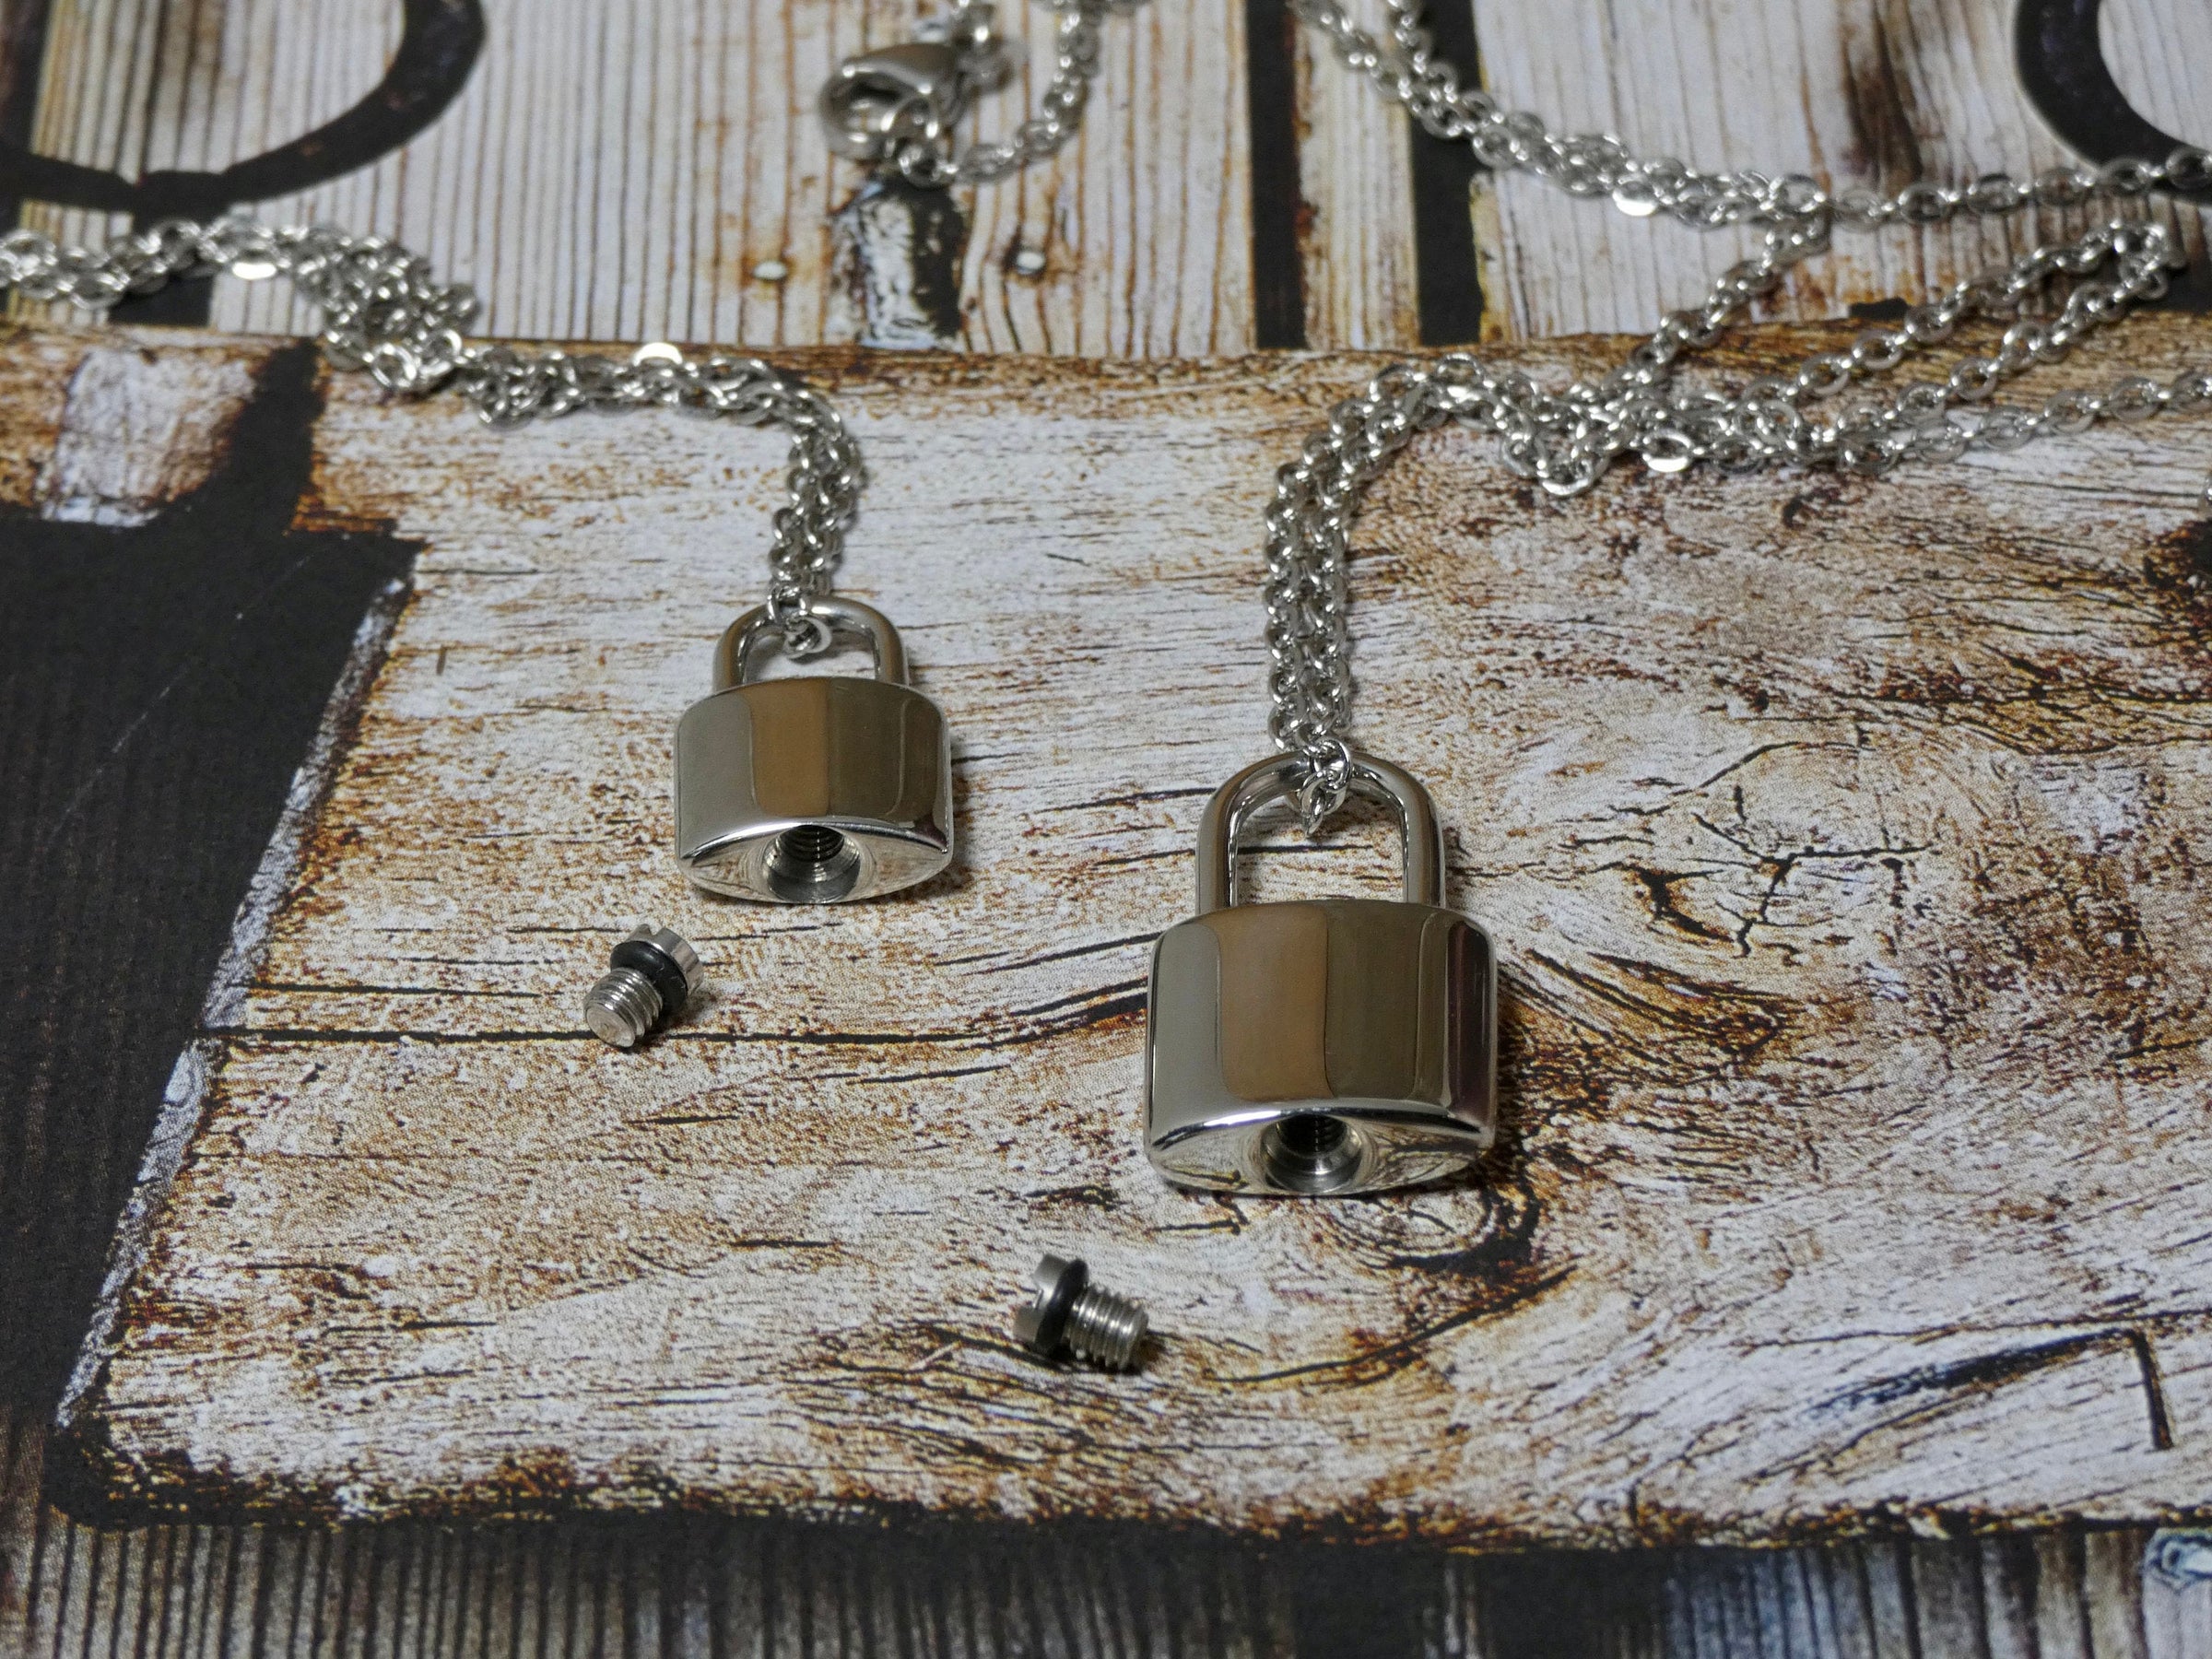 Small Lock and Key Necklace Sterling Silver Padlock Necklace 